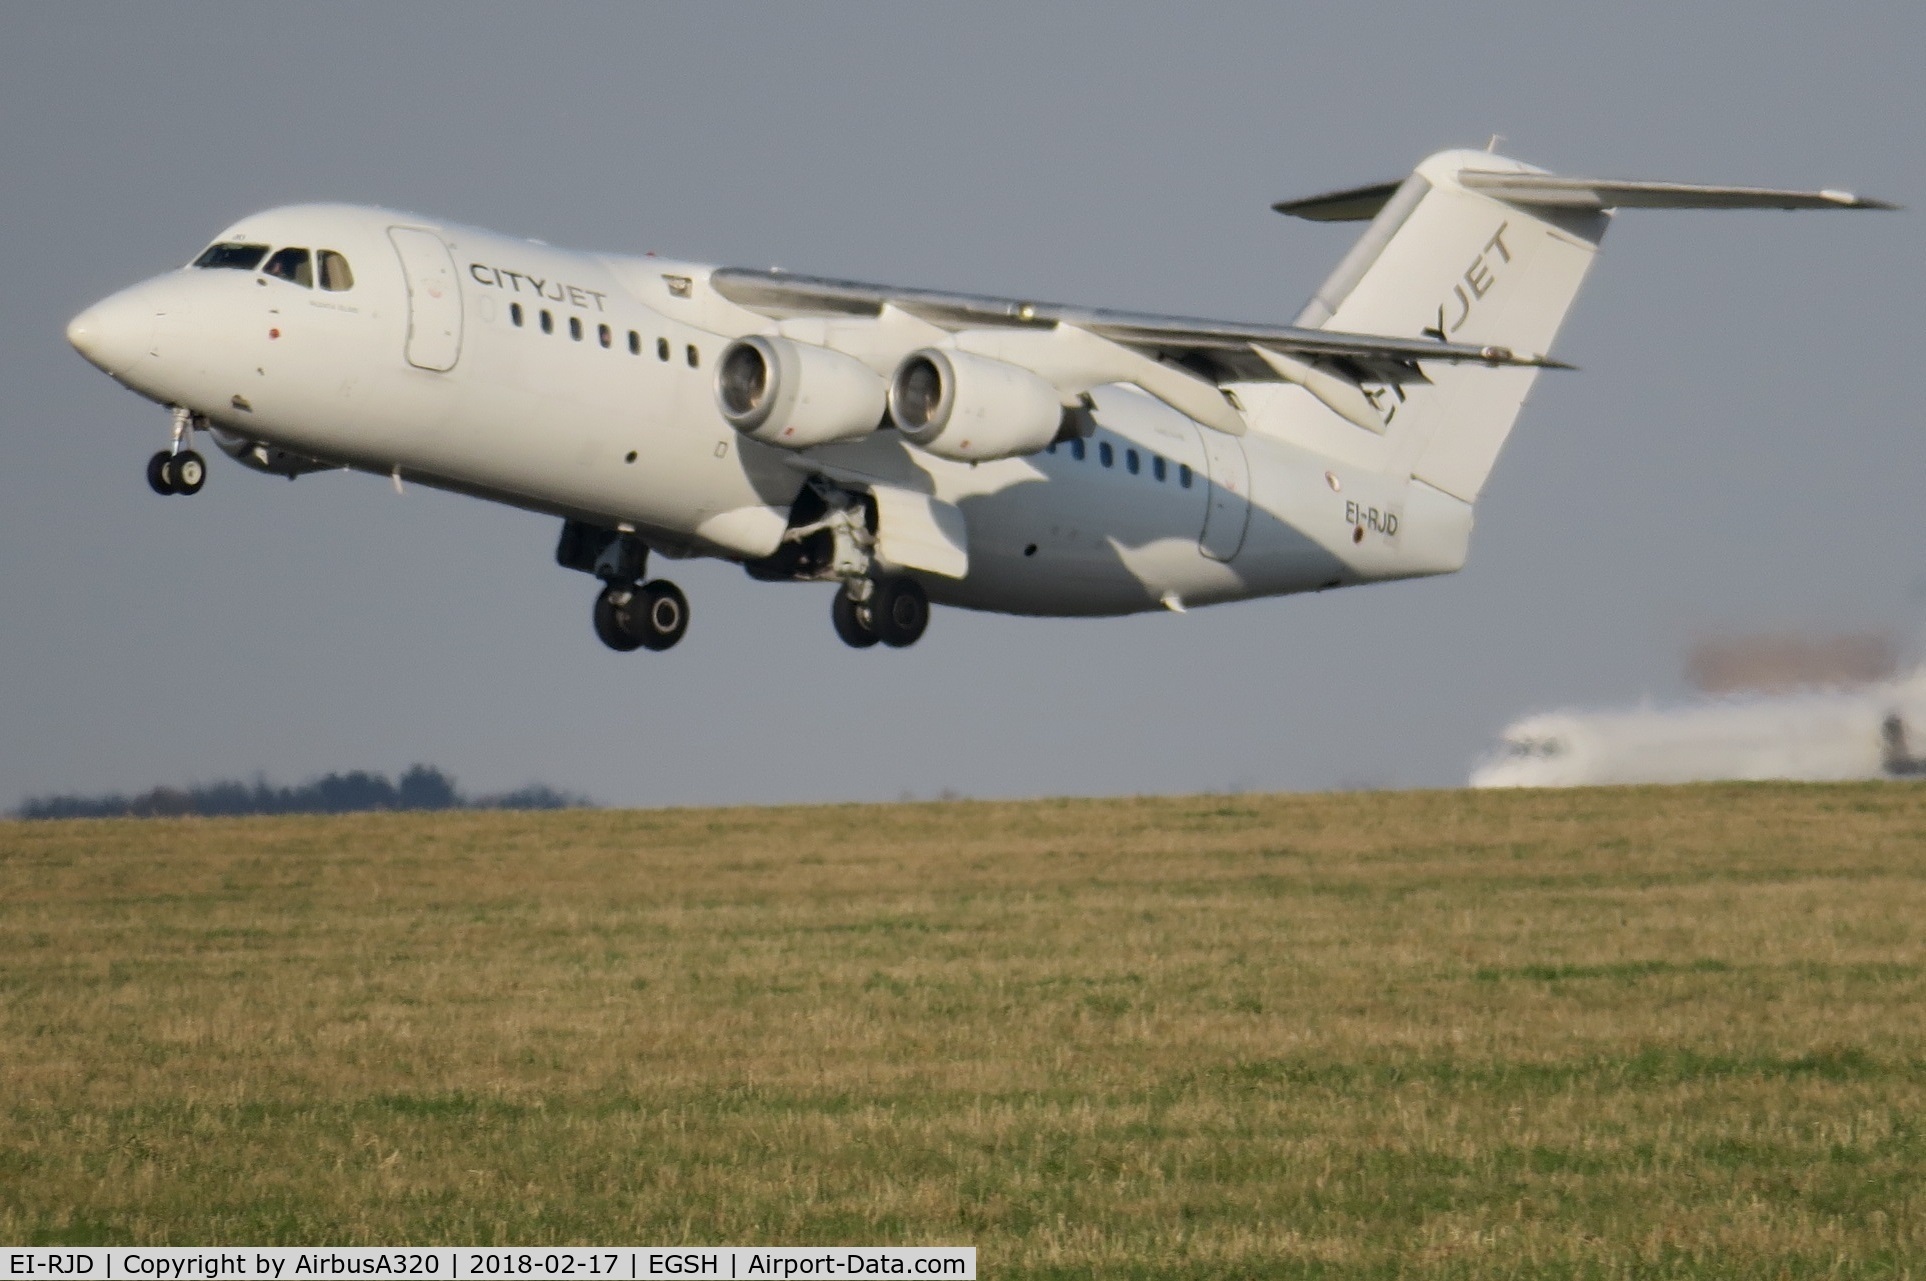 EI-RJD, 1998 BAE Systems Avro 146-RJ85 C/N E.2334, Departing Norwich after work with KLM